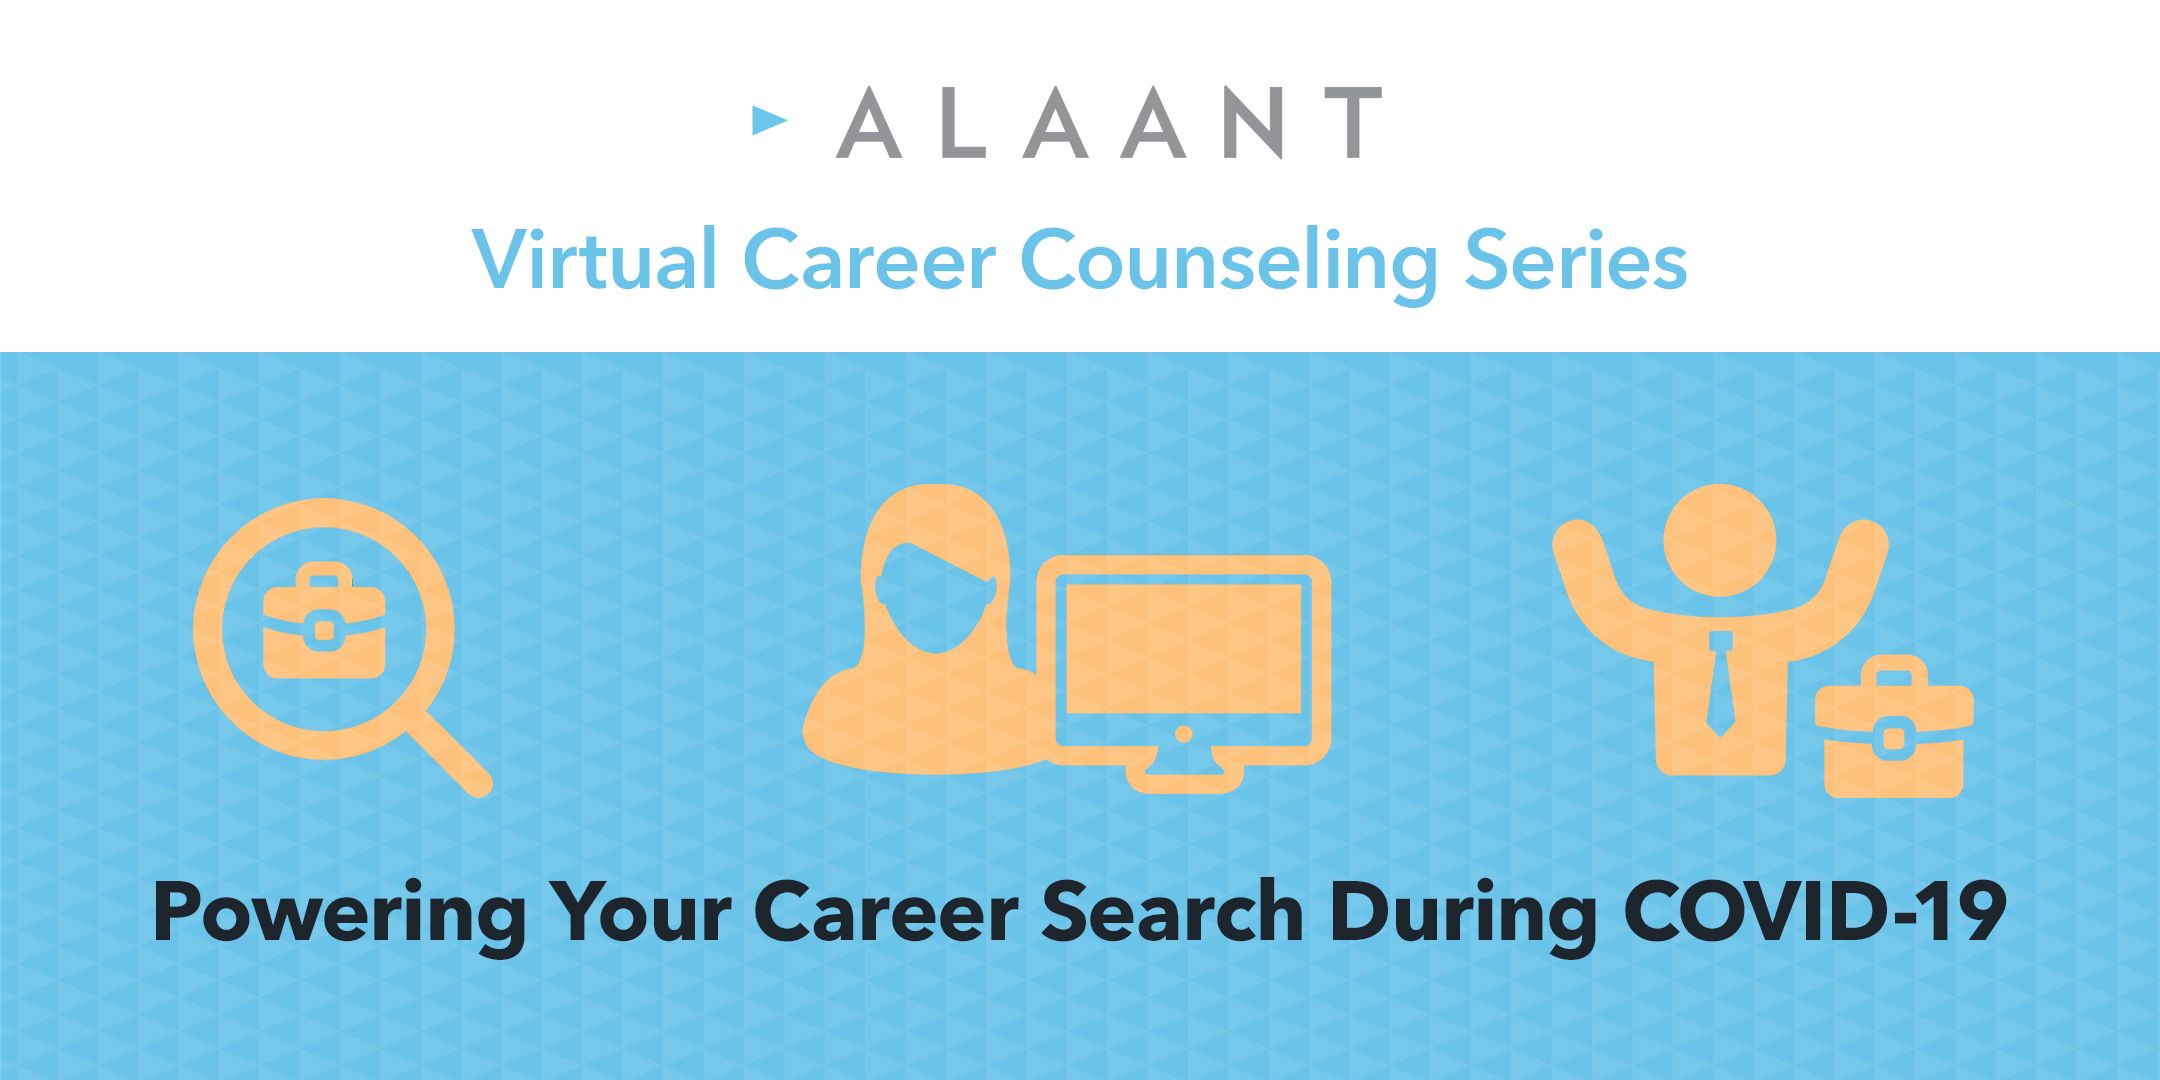 Alaant Workforce Solutions Launches Virtual Career Counseling Series to Assist Job Seekers Impacted by COVID-19 Pandemic